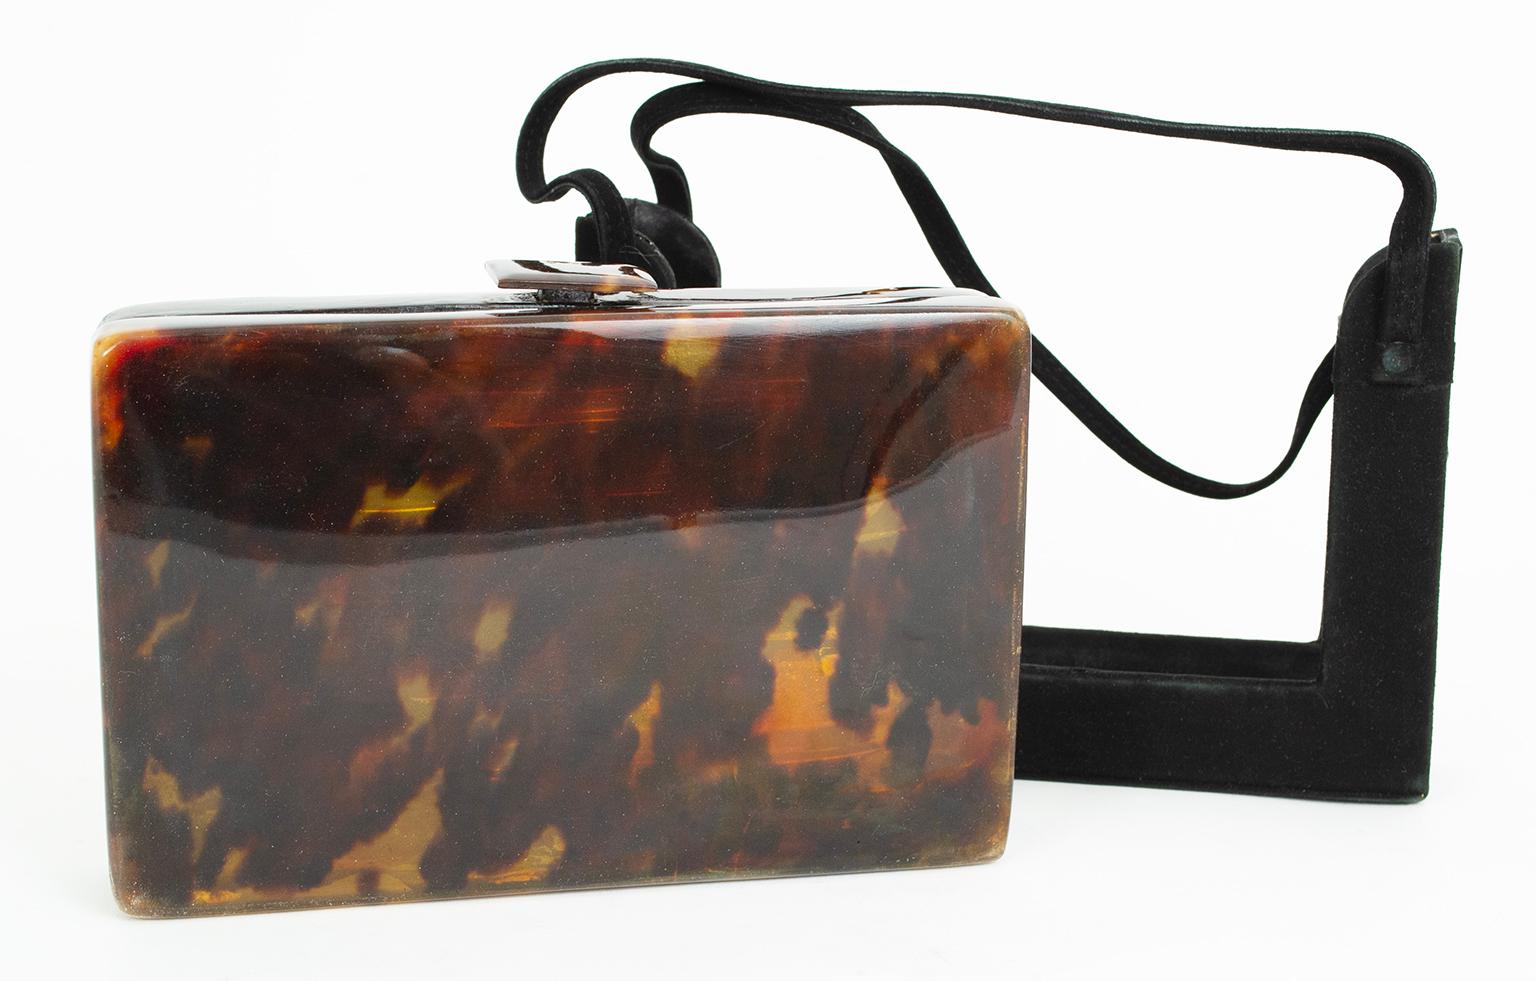 NOTE: THIS ITEM CAN ONLY BE SHIPPED TO ARIZONA ADDRESSES

As ingenious as it is rare and beautiful, this tortoiseshell clutch includes an open suede carrying sleeve that allows it to function as a top handle purse as well as a clutch. Featuring a